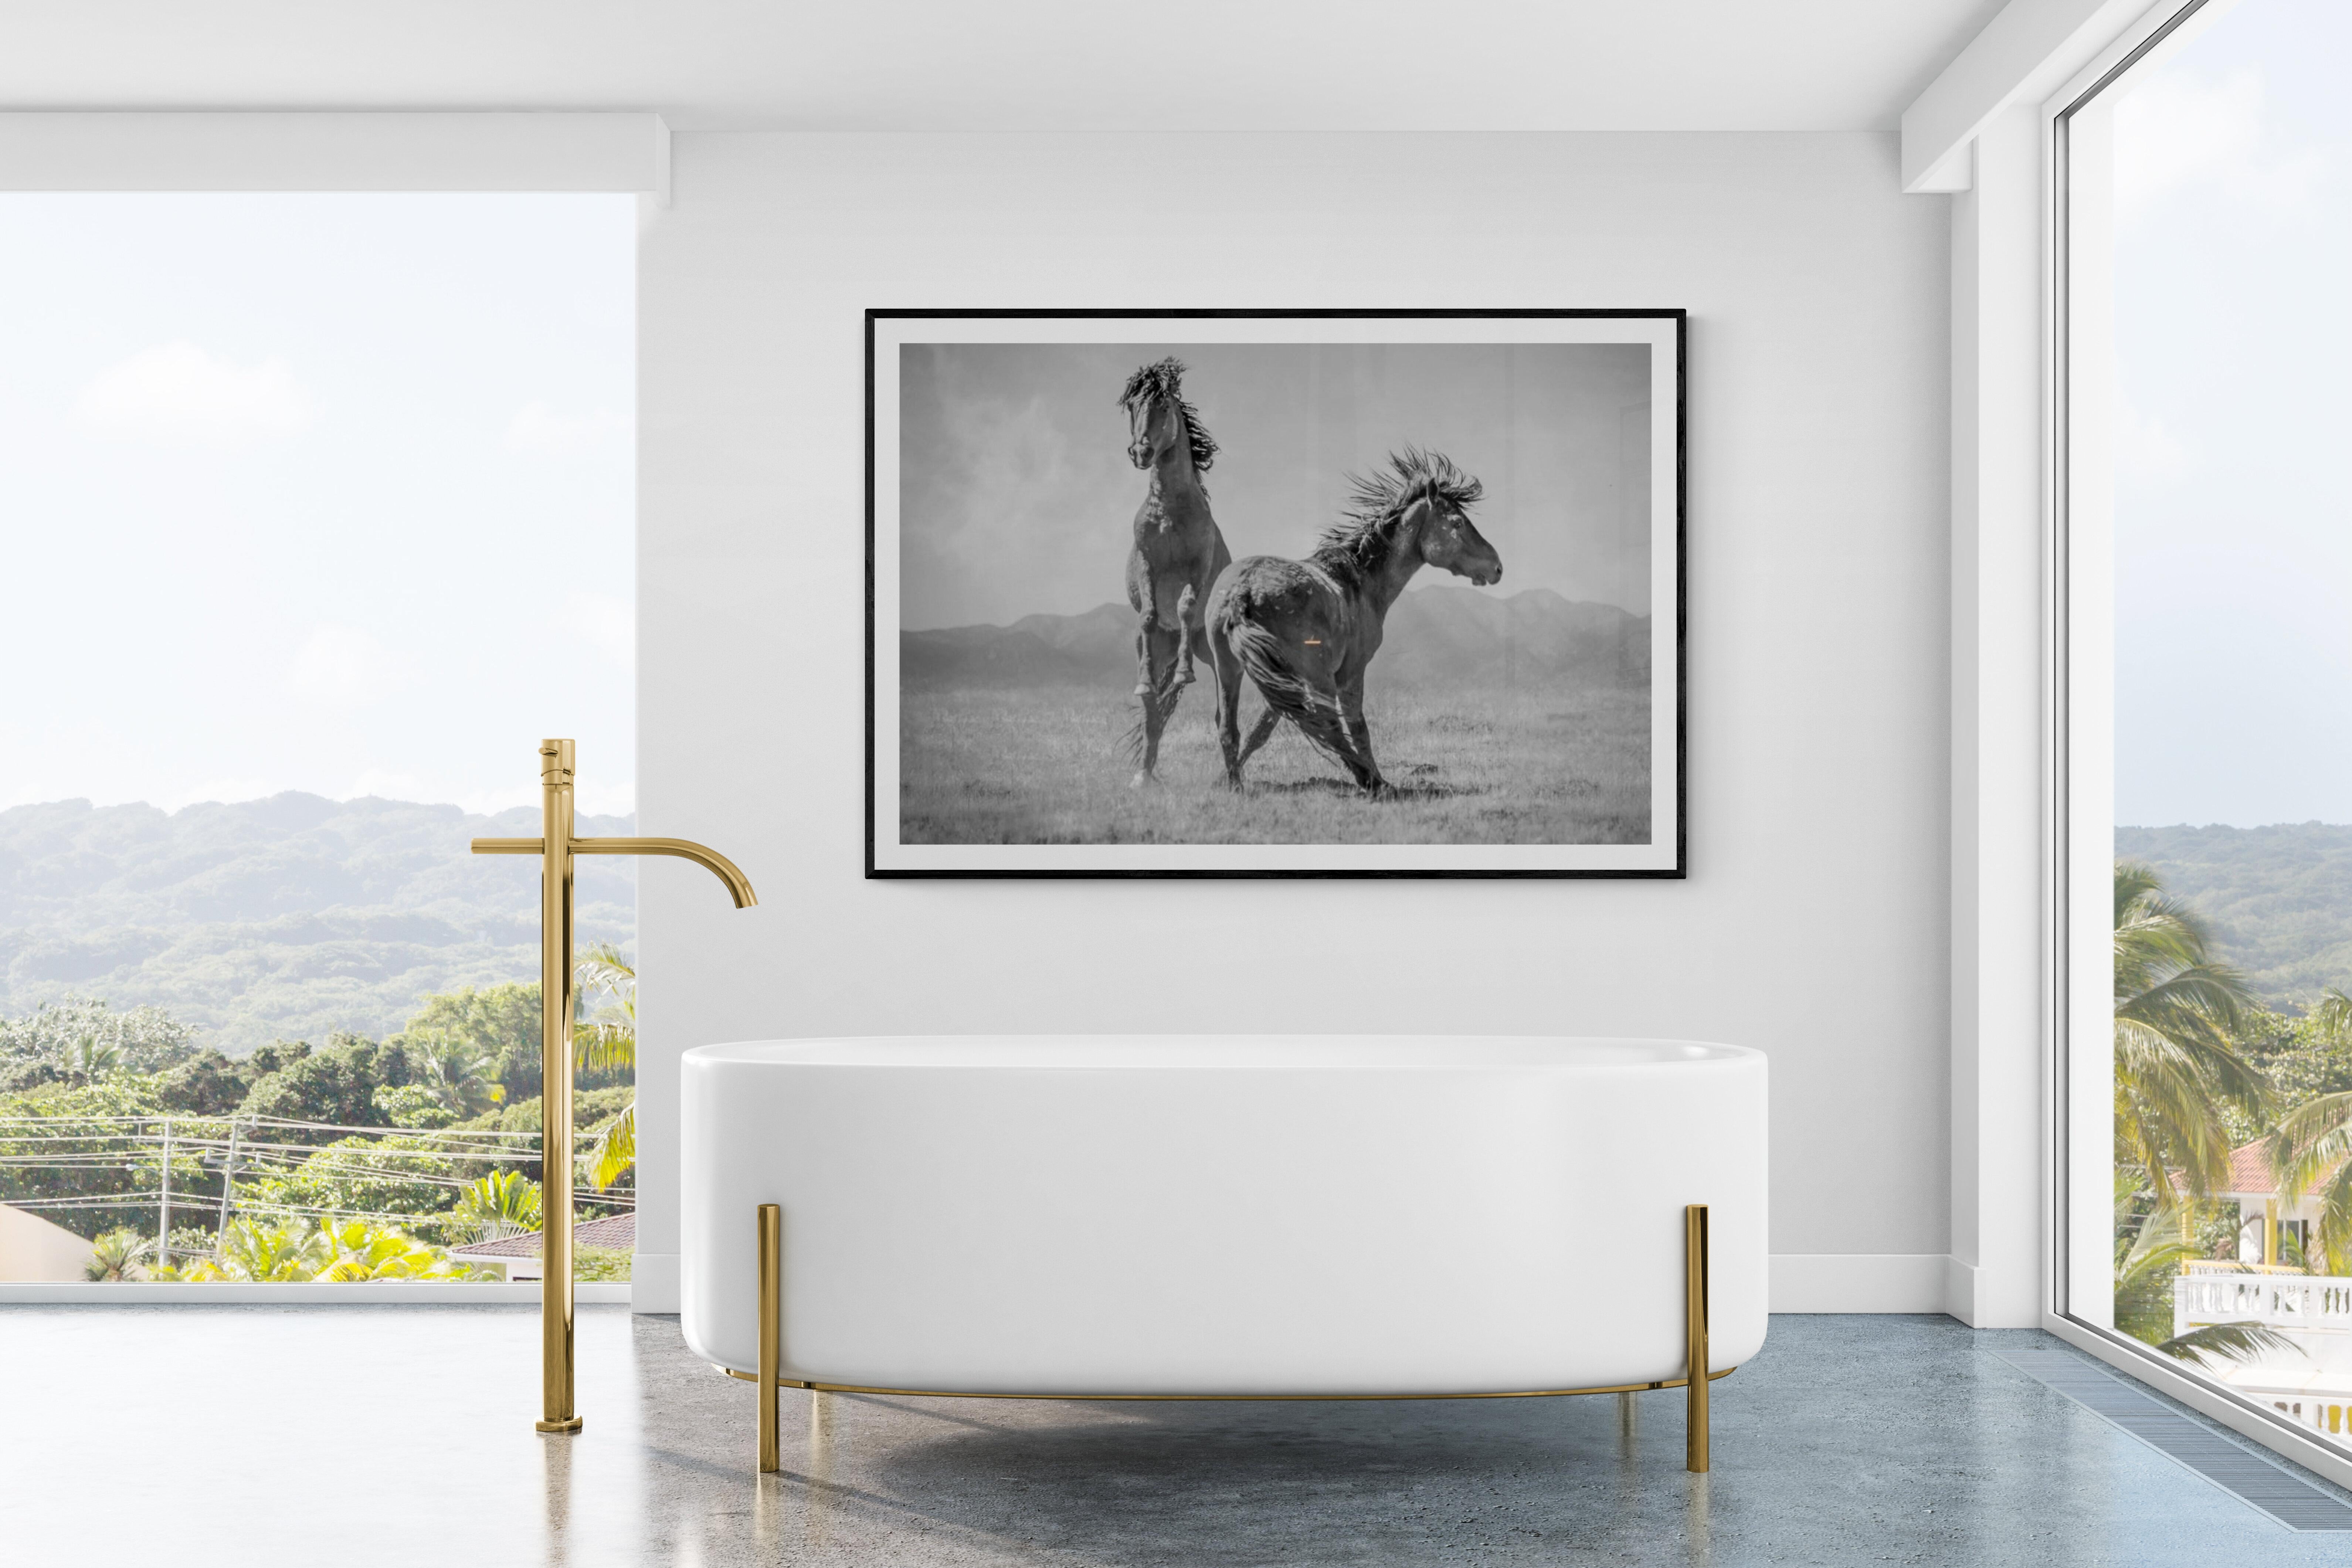 This is a contemporary photograph of American Wild Mustangs. 
40x50 Edition of 10. Signed by Shane. 
Printed on archival paper and using archival inks
Framing available. Inquire for rates. 

Shane Russeck has built a reputation for capturing